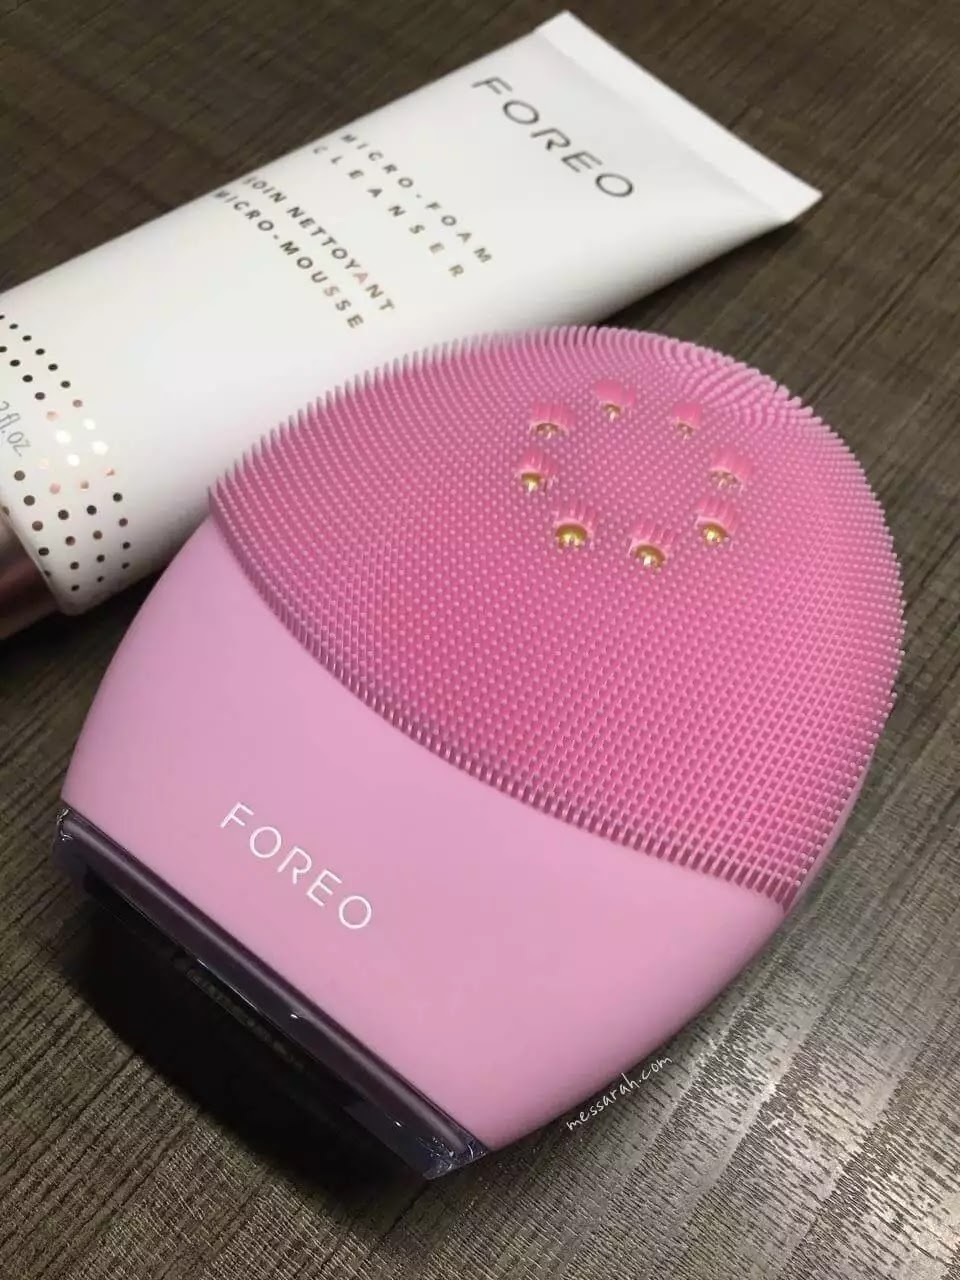 [REVIEW] LUNA 3 Plus by FOREO Sweden